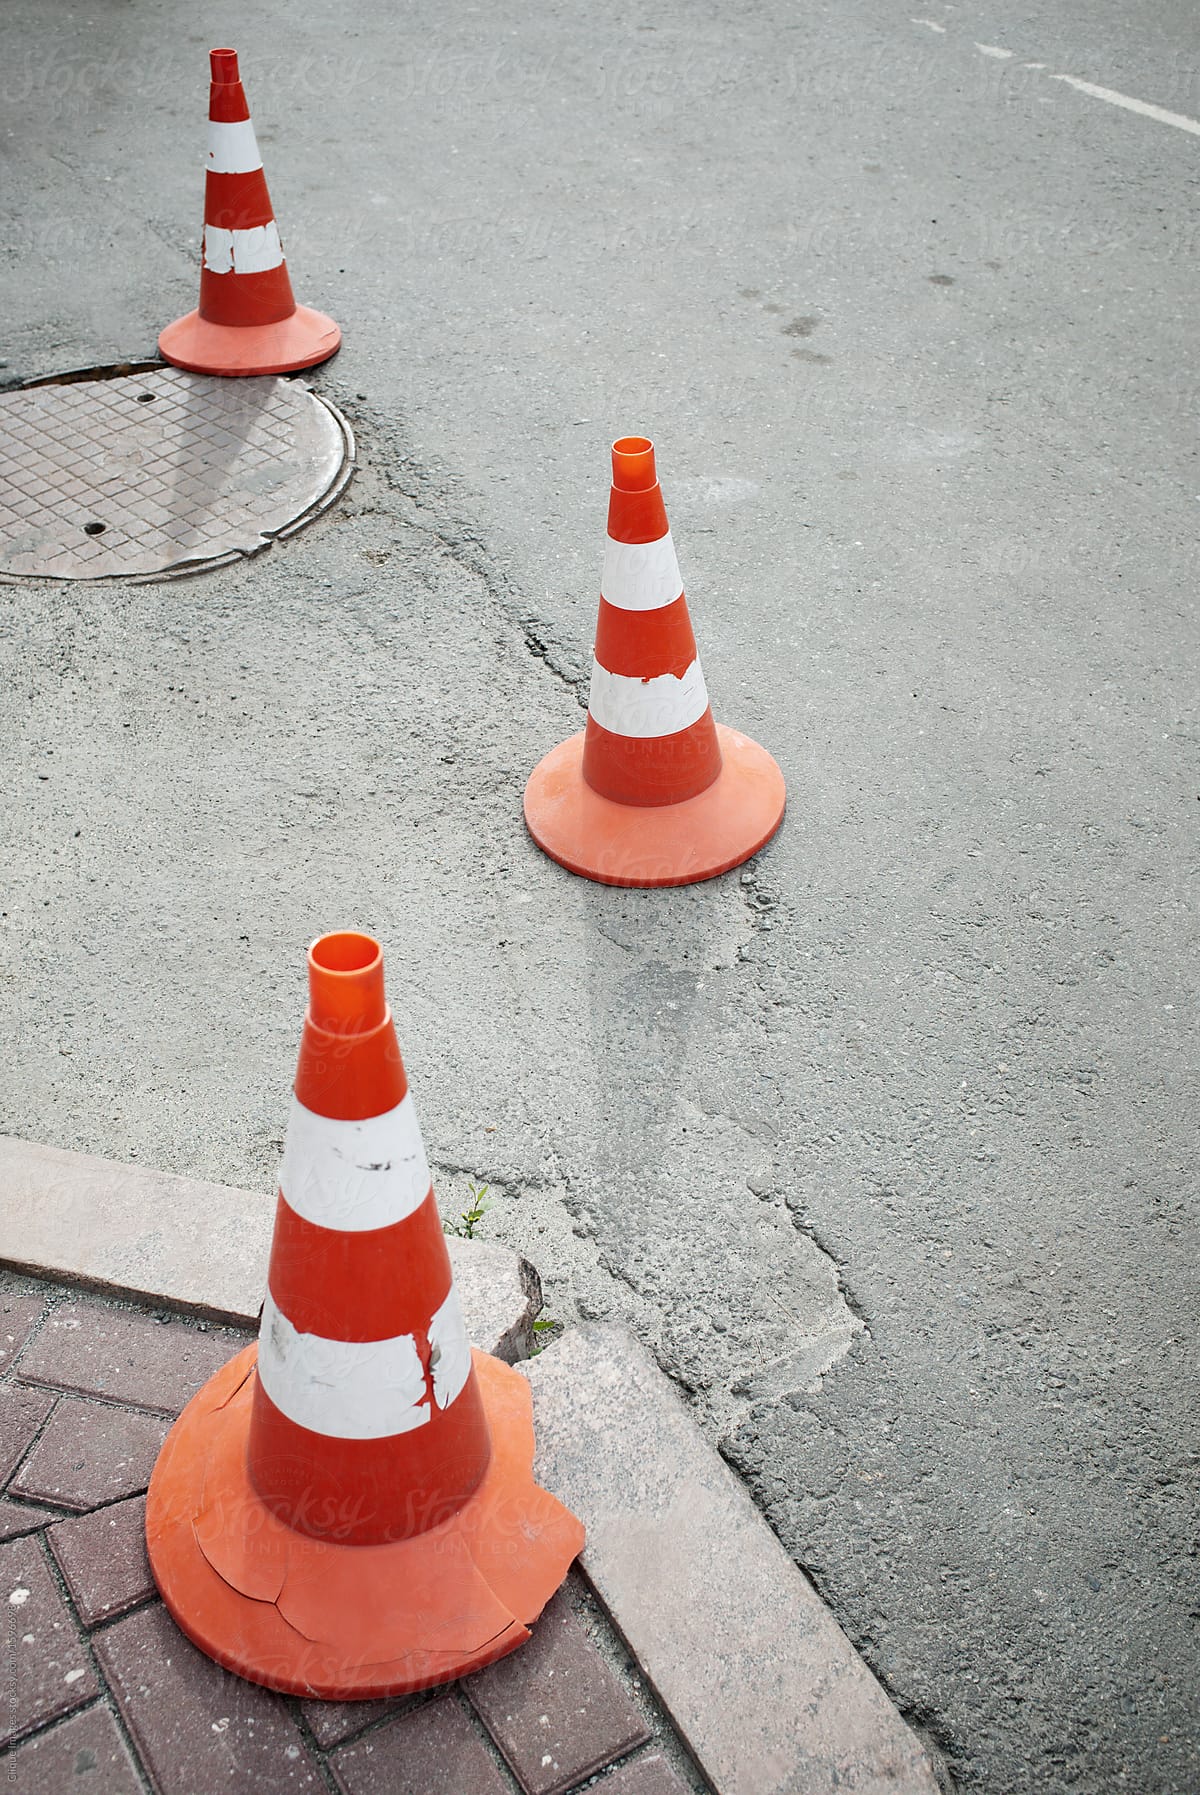 Barrier cones on road